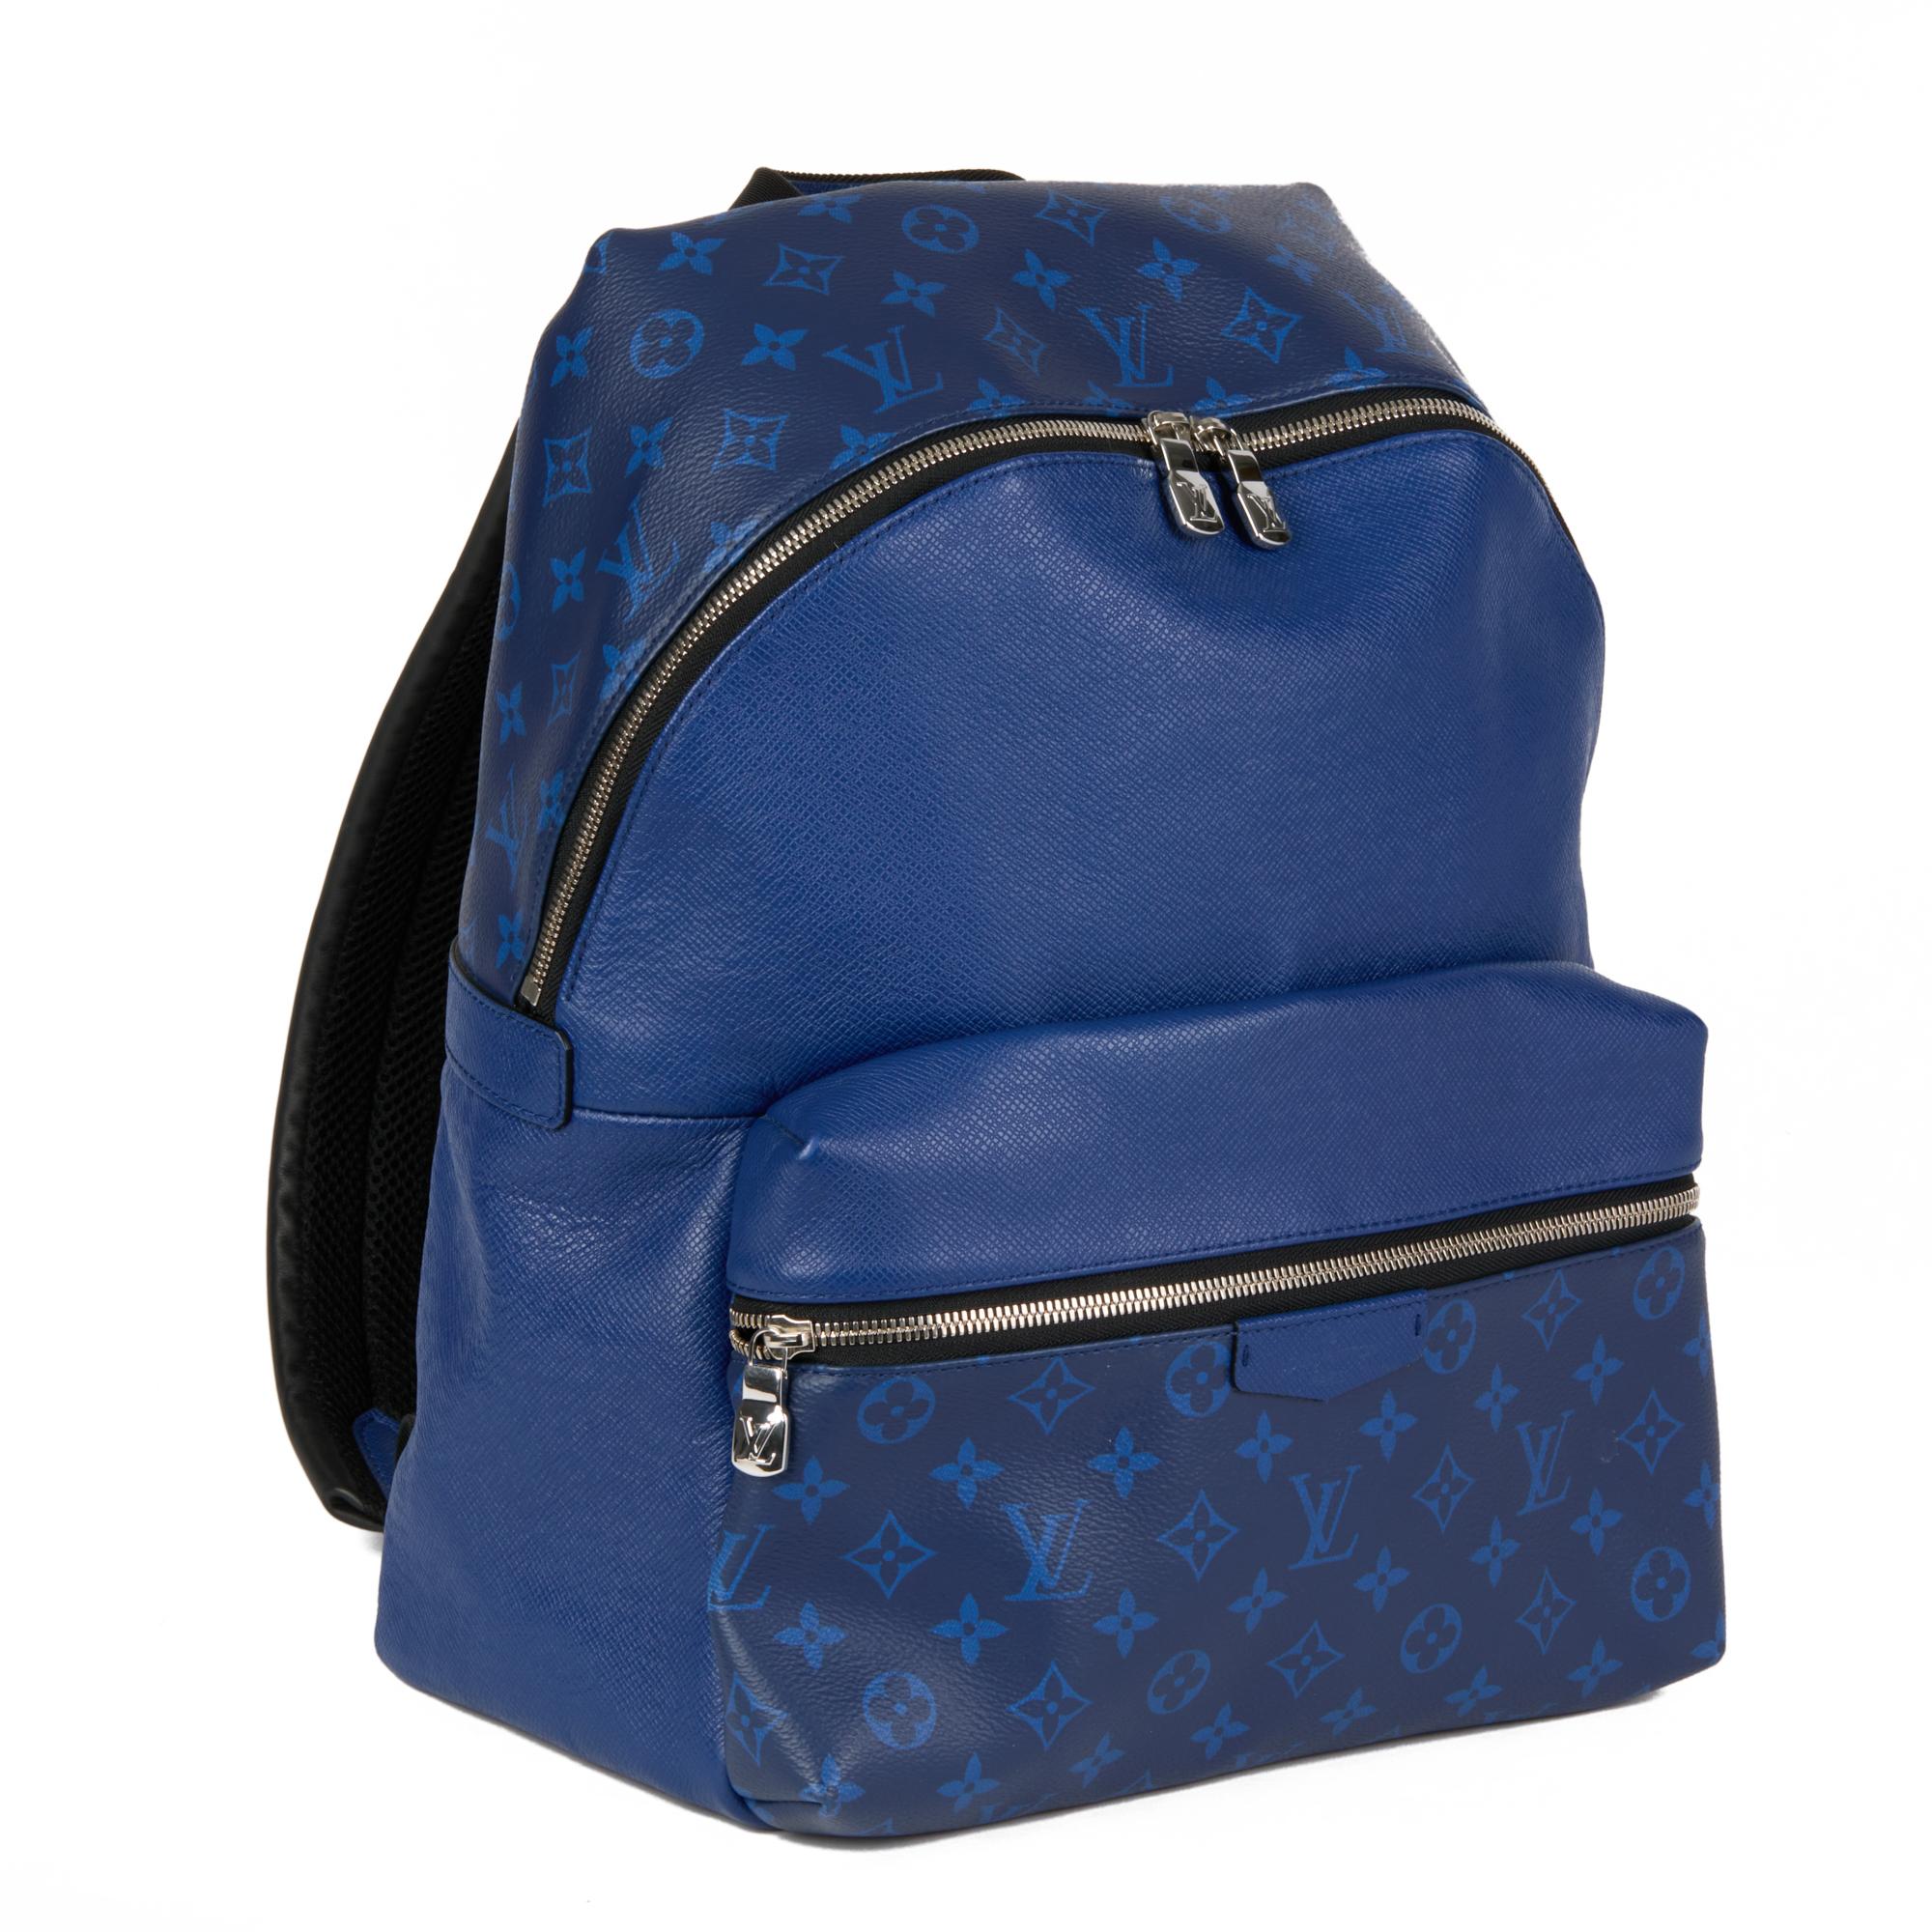 LOUIS VUITTON
Blue Monogram Coated Canvas & Taiga Leather Discovery Backpack PM

Xupes Reference: CB642
Serial Number: TJ0230
Age (Circa): 2000
Authenticity Details: Date Stamp (Made in France)
Gender: Gents
Type: Backpack

Colour: Blue
Hardware: